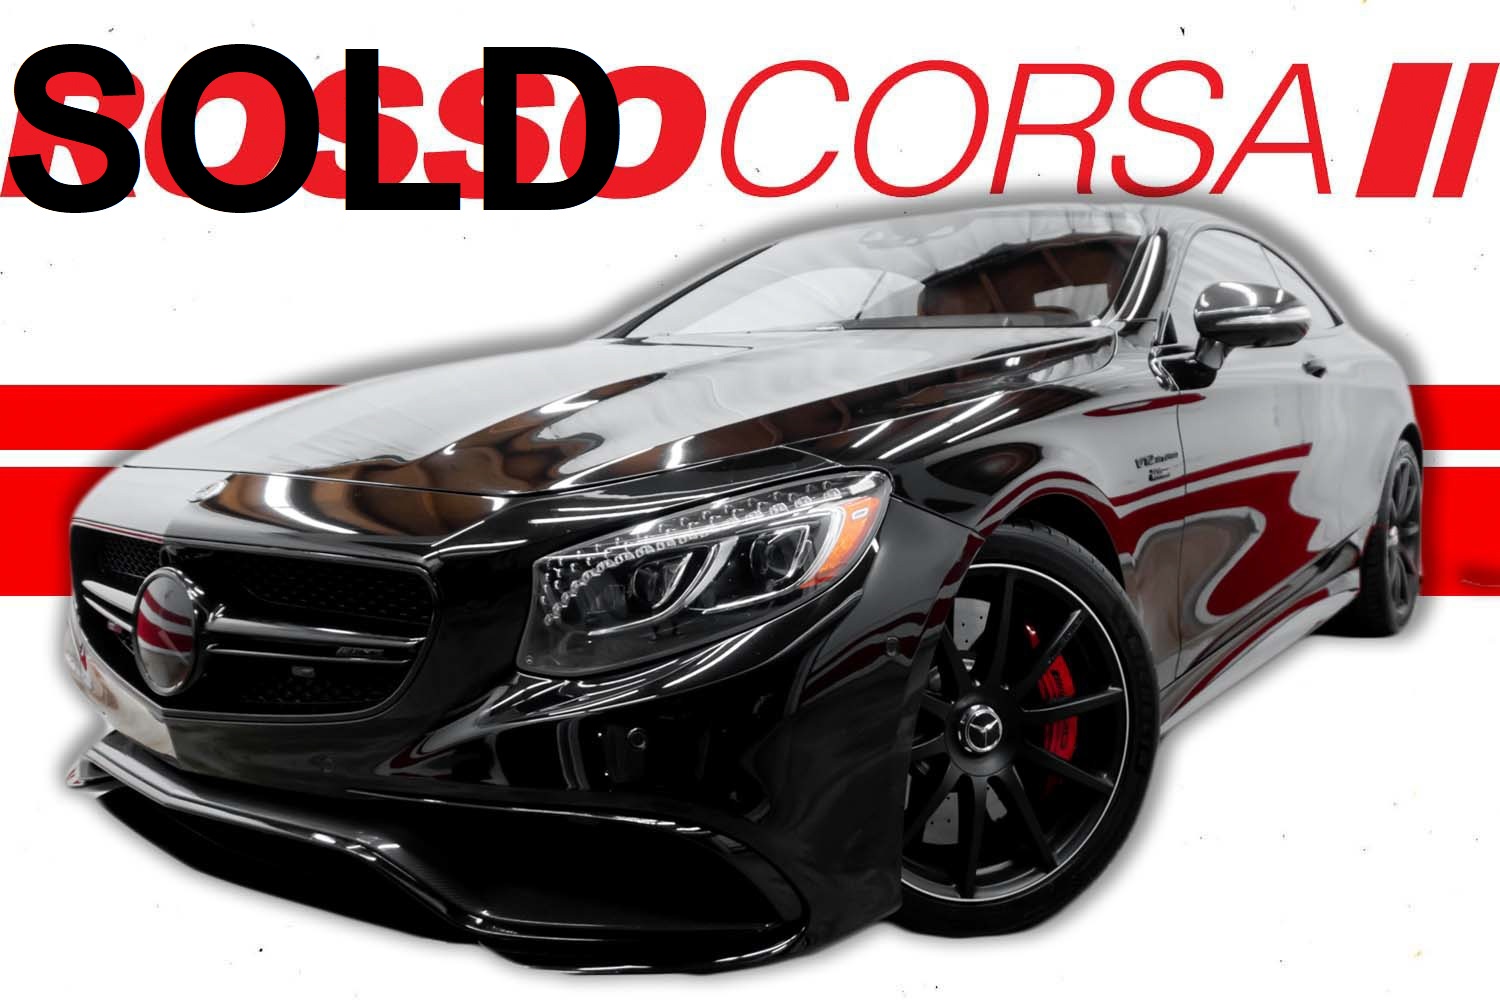 2015 Mercedes-Benz S65 AMG Coupe CUSTOM ($265K MSRP)